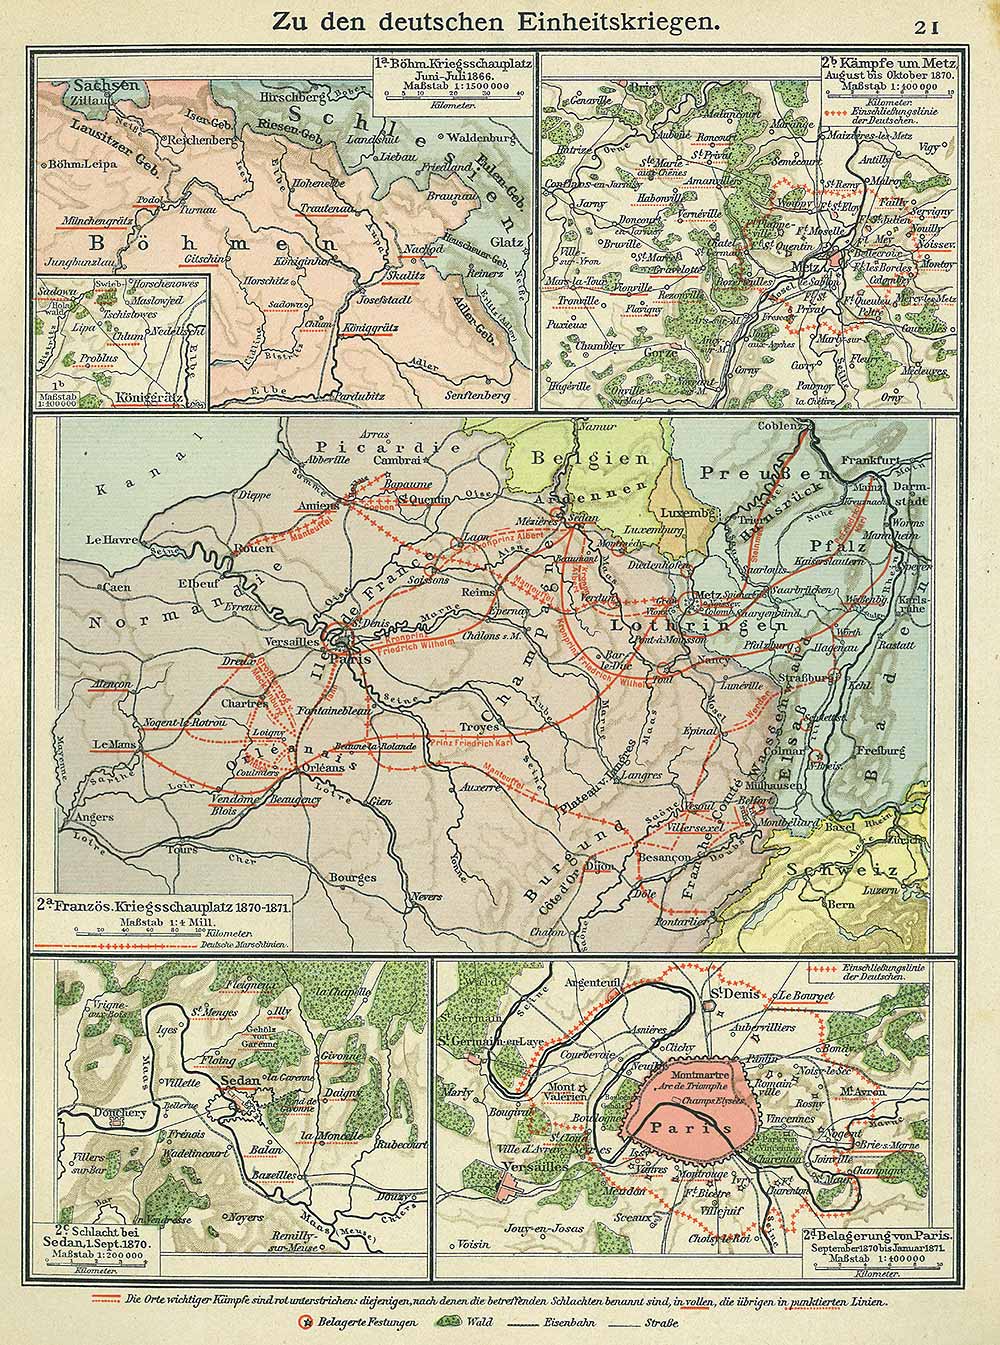 Franco-Prussian war, maps of campaigns in 1866, 1870, 1871, Andrees 'Berliner Schul-Atlas', 1916, page  21, published size to print borders 19.02 cm wide by 26.59 cm high.